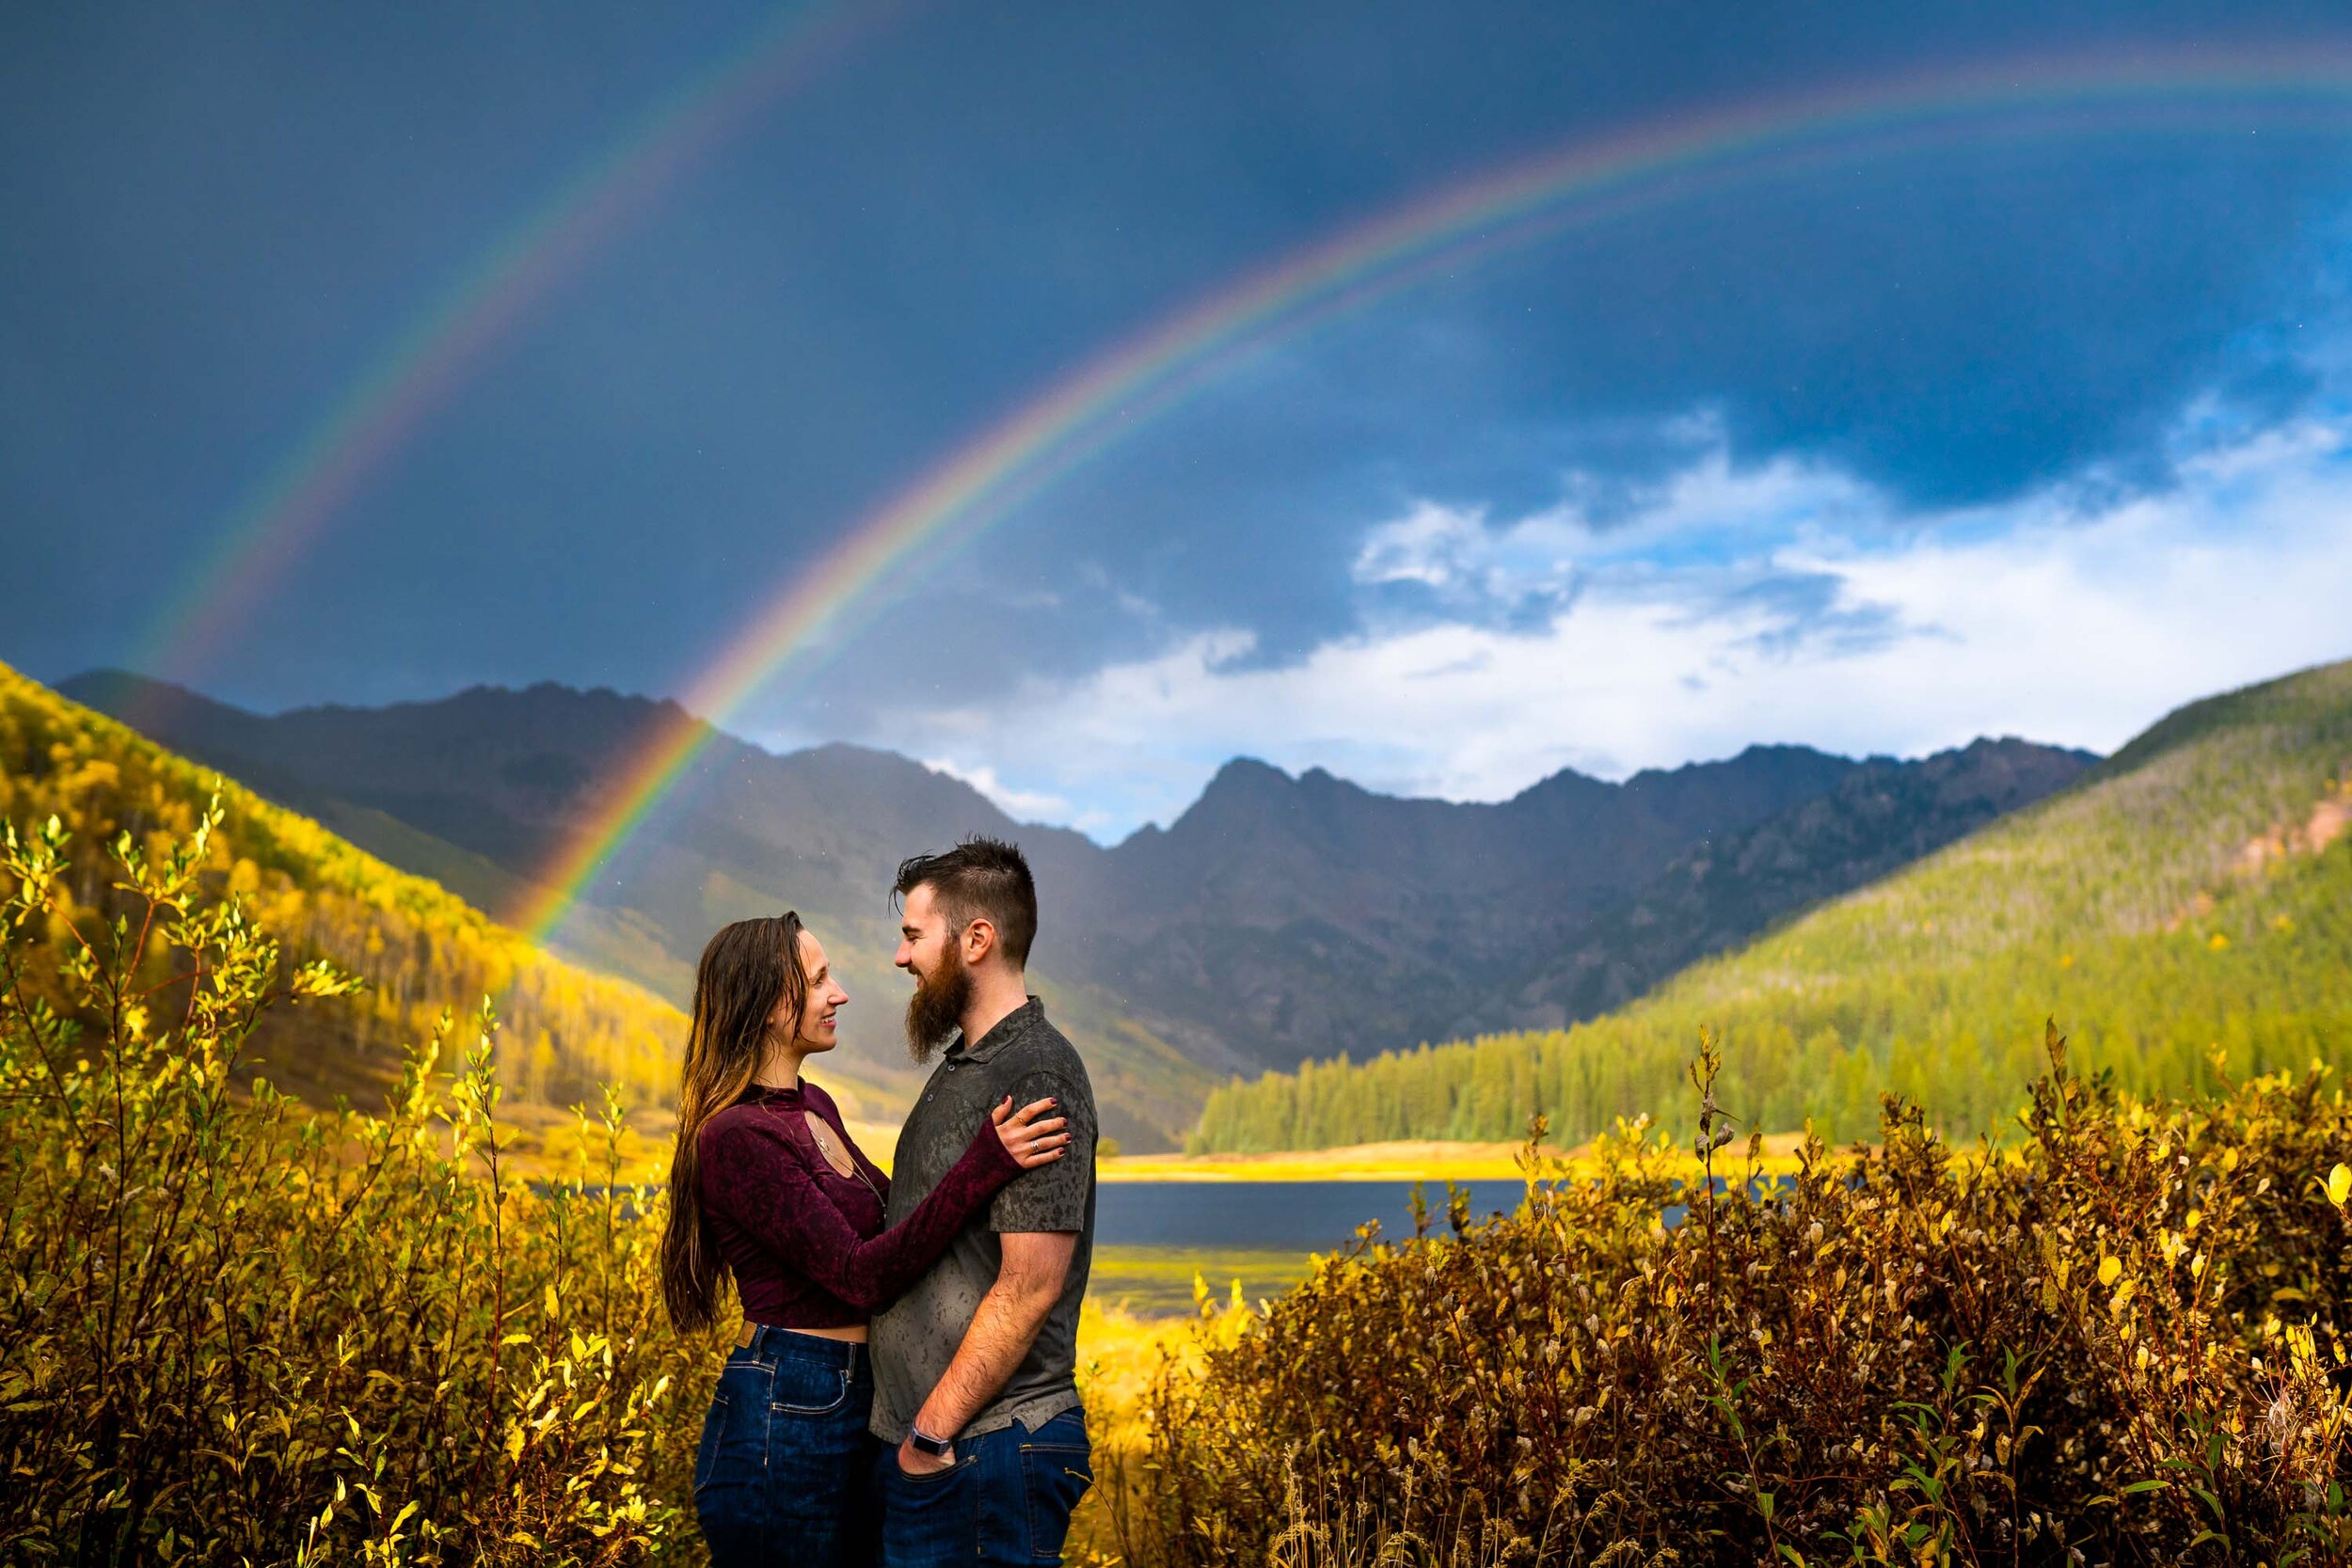 Engaged couple embraces for a portrait during a rainstorm with a double rainbow behind them arching over Piney Lake, Engagement Session, Engagement Photos, Engagement Photos Inspiration, Engagement Photography, Engagement Photographer, Fall Engagement Photos, Mountain Engagement Photos, Piney River Ranch engagement photos, Vail engagement session, Vail engagement photos, Vail engagement photography, Vail engagement photographer, Vail engagement inspiration, Colorado engagement session, Colorado engagement photos, Colorado engagement photography, Colorado engagement photographer, Colorado engagement inspiration